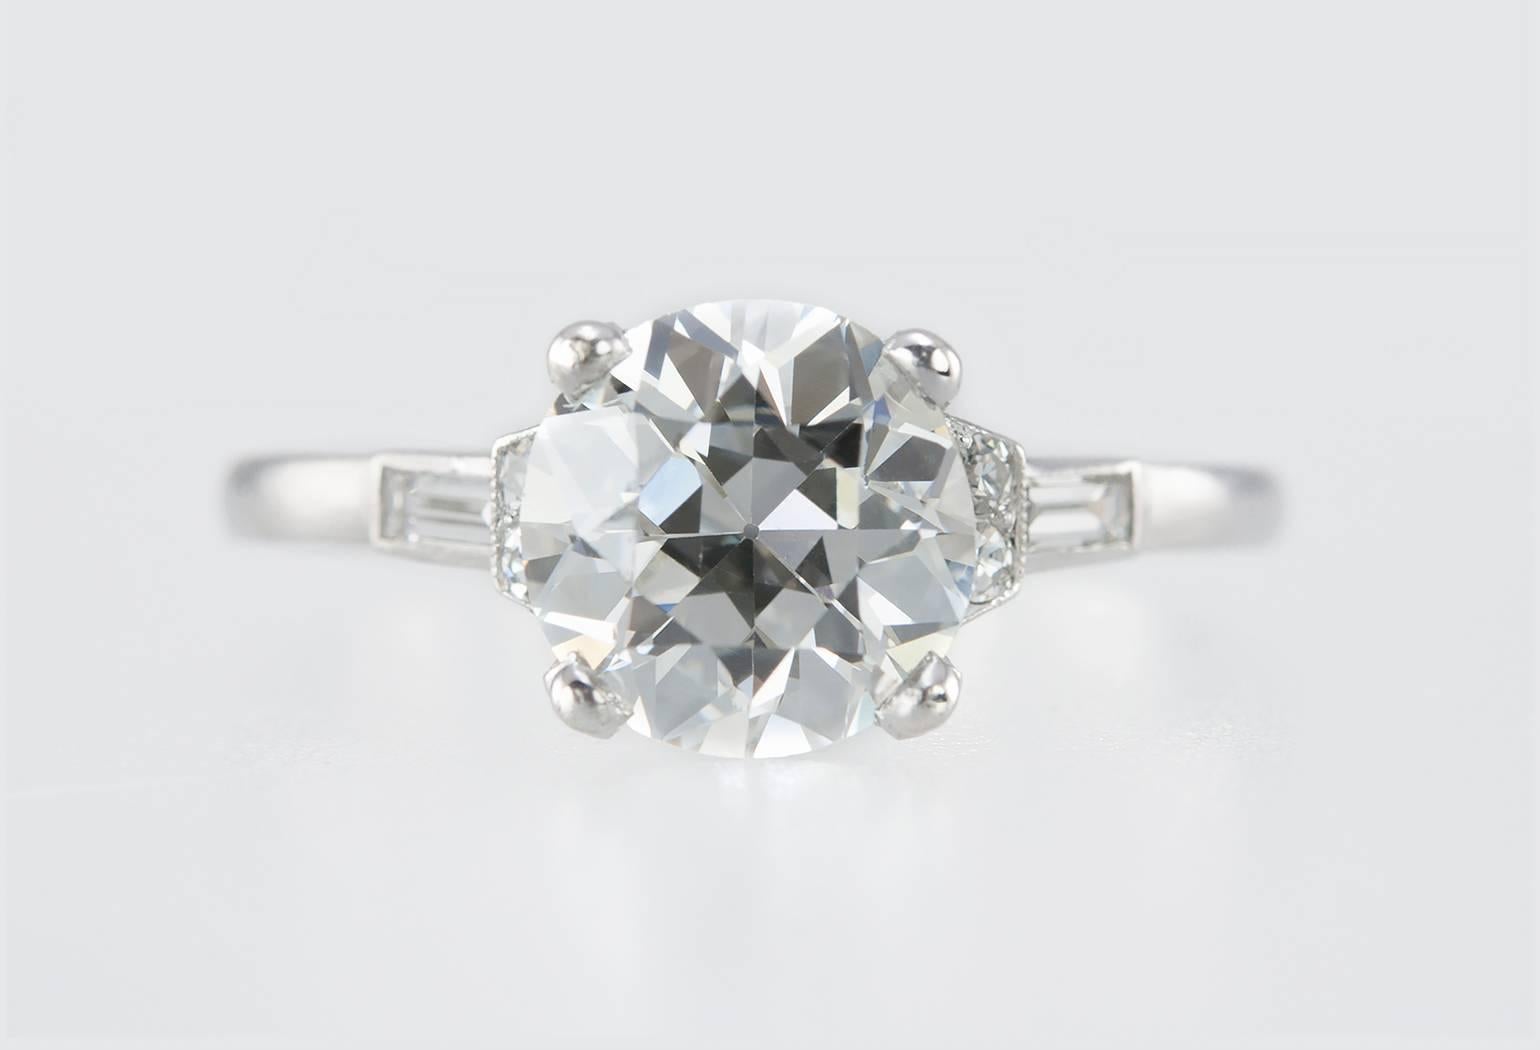 A gorgeous Art Deco diamond and platinum engagement ring from circa 1930s.  This ring features a 1.68 carat Old European Cut diamond that is I in color and VS1 in clarity (per GIA certificate).  There are an additional 4 round diamonds and 2